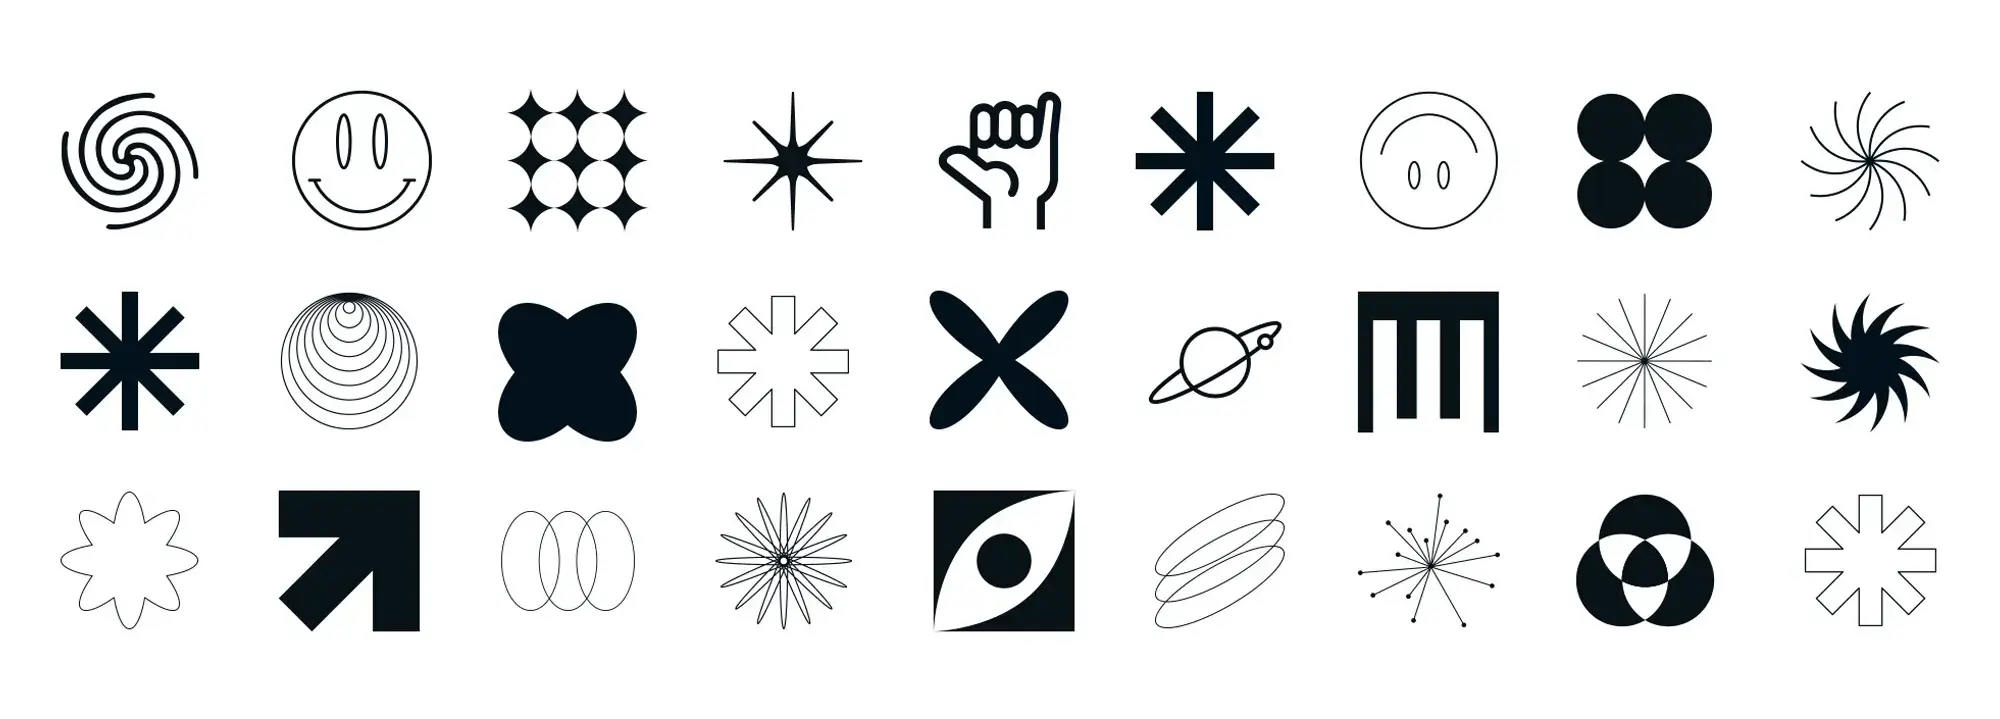 Variety of free WordPress icons for customizing your blog's look